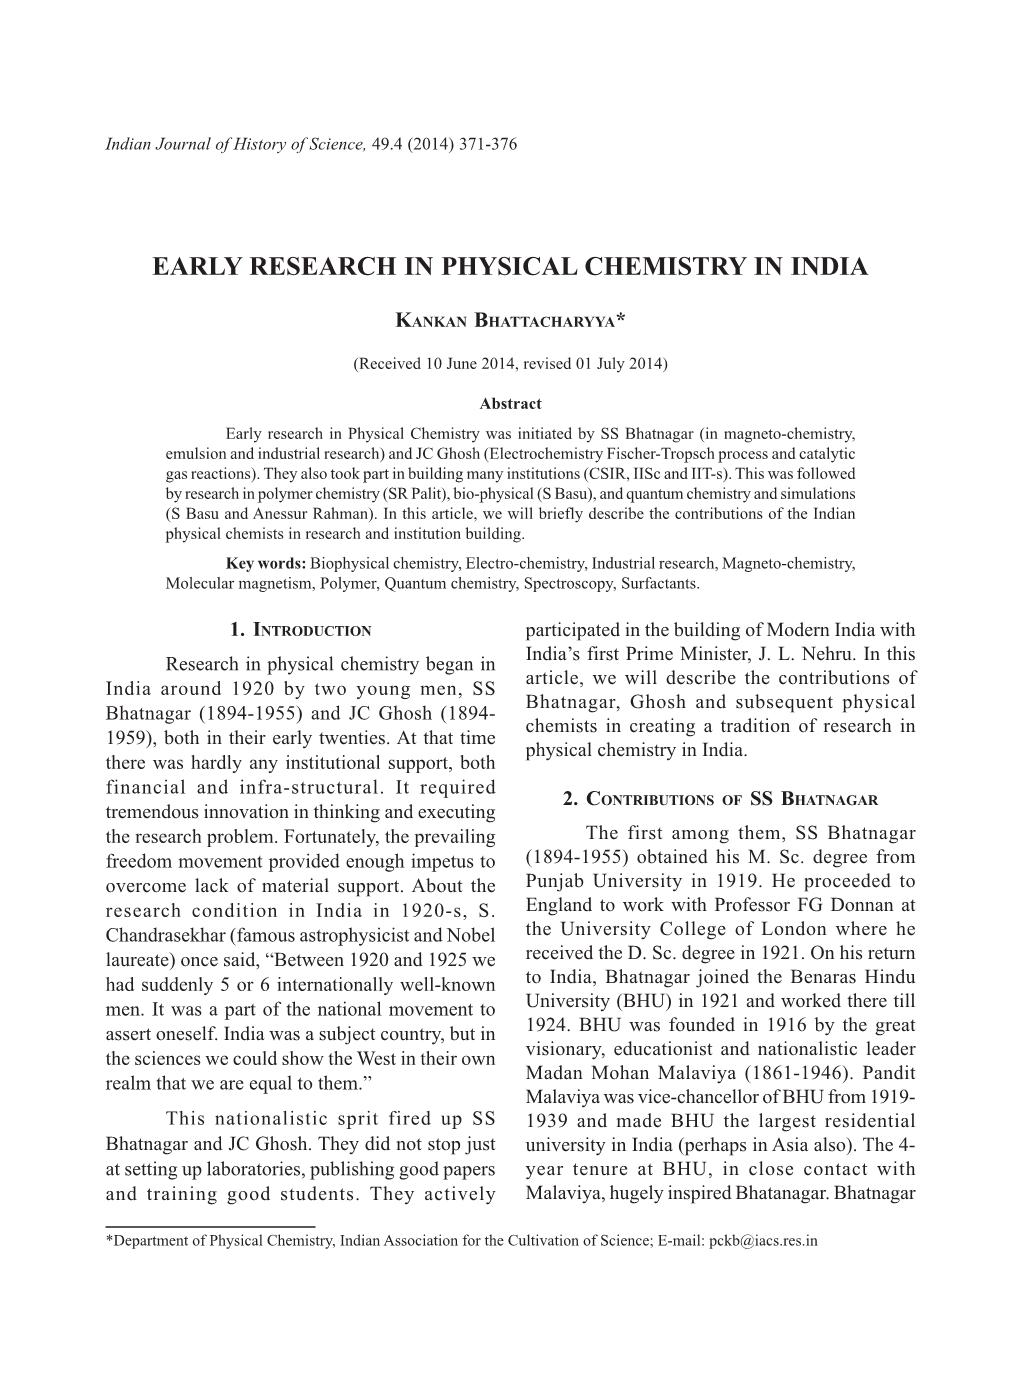 Early Research in Physical Chemistry in India